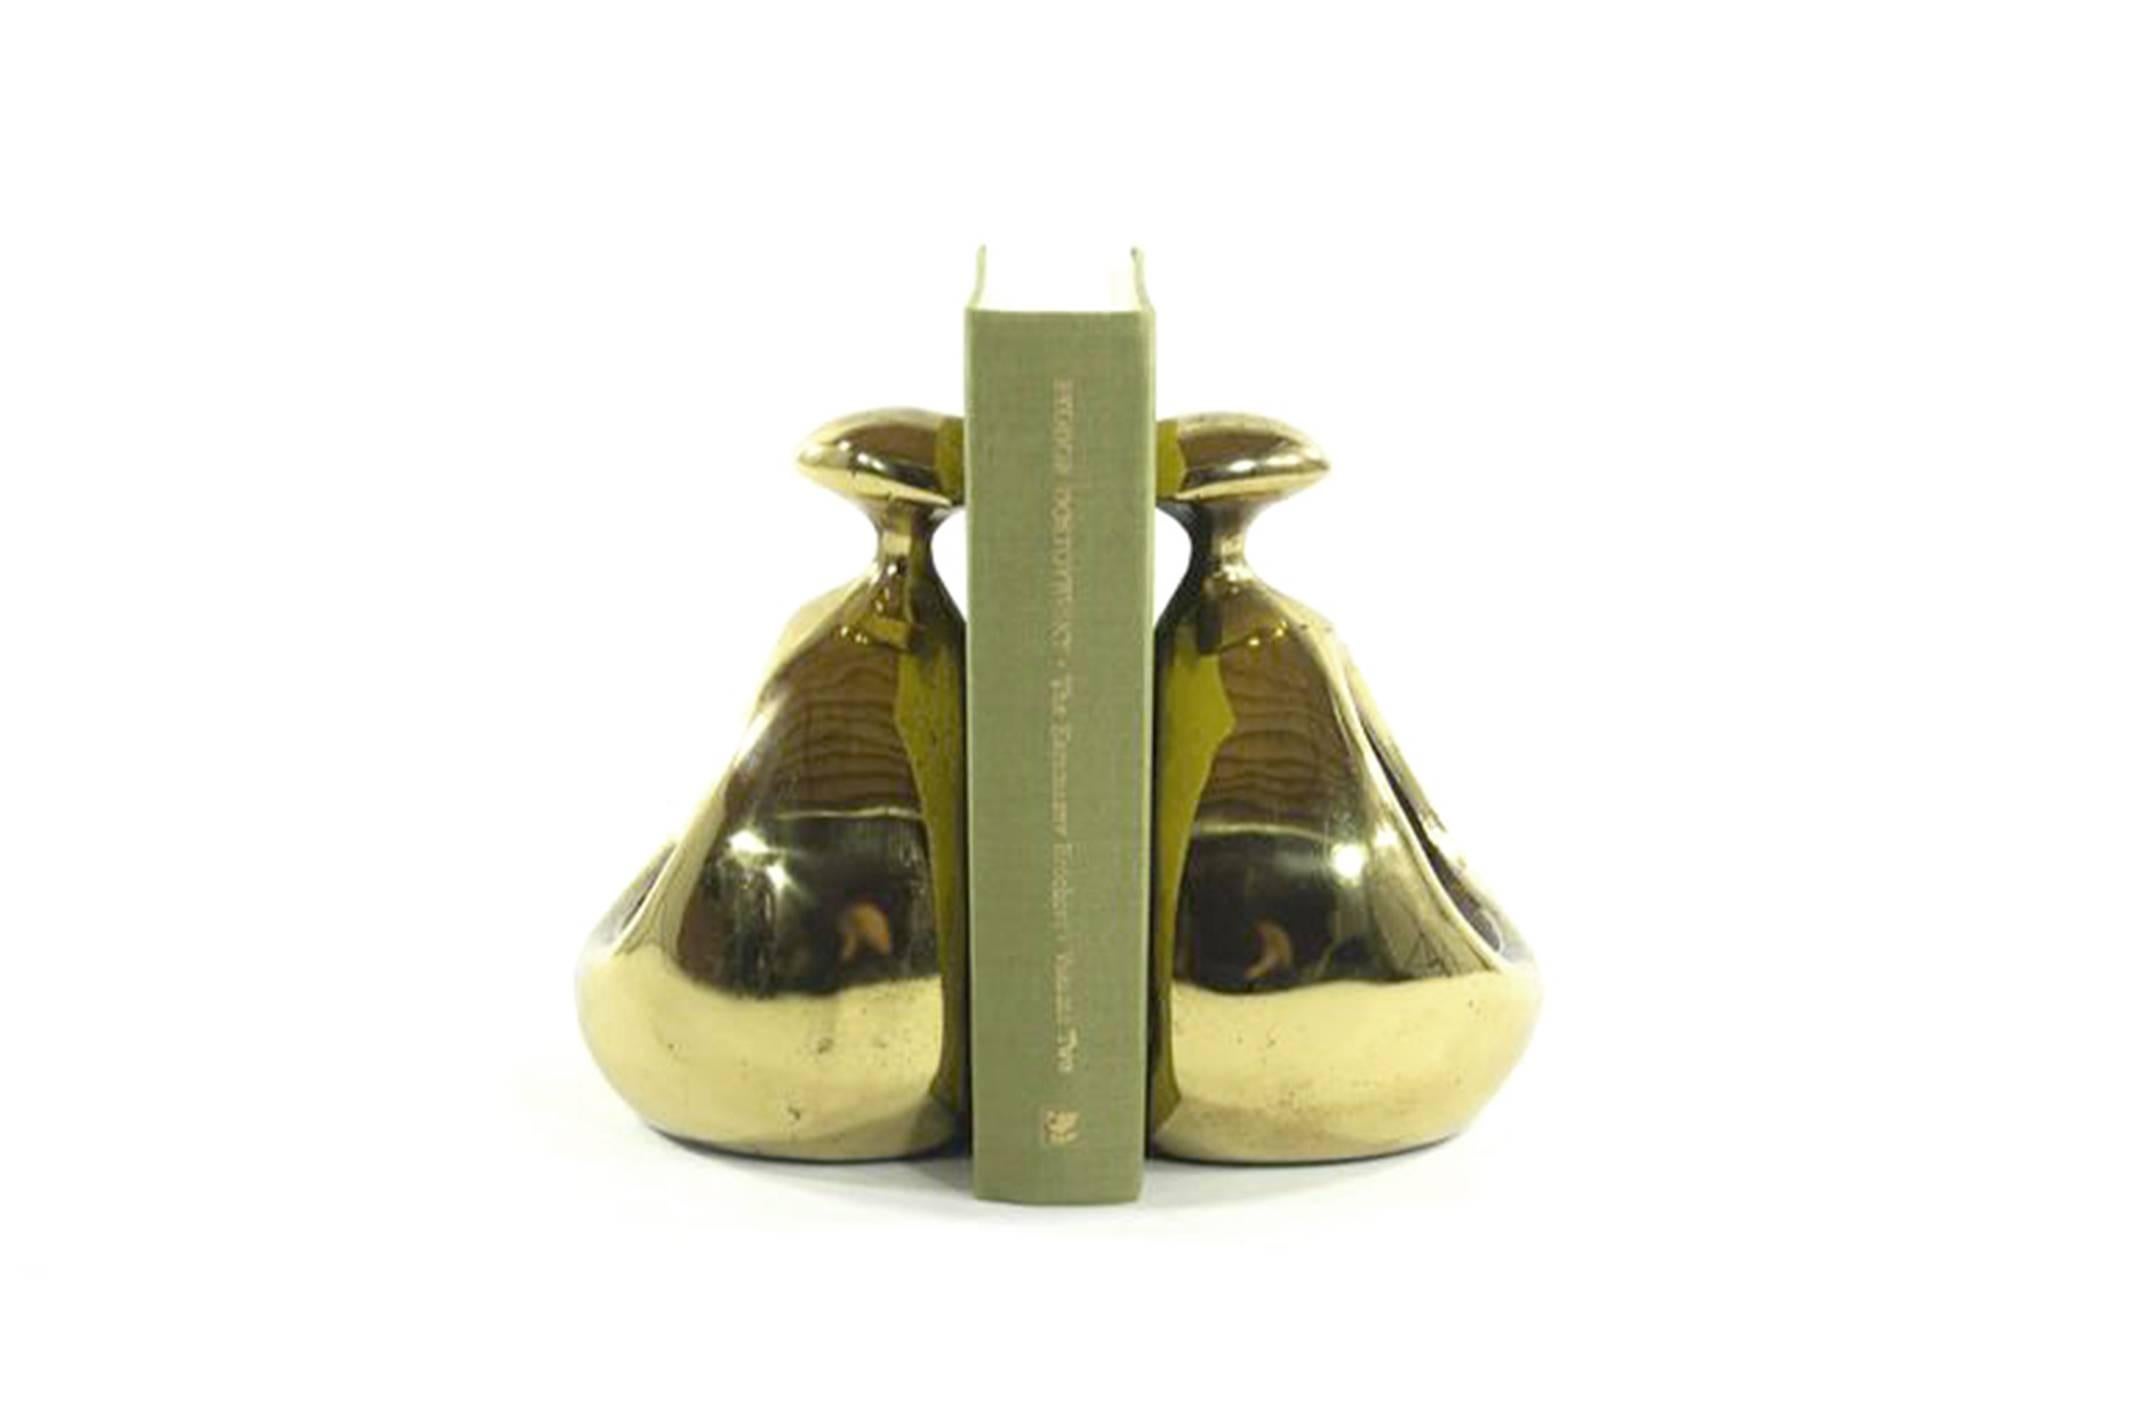 Pair of Brass Stirrup Bookends by Ben Seibel for Jenfred Ware 2